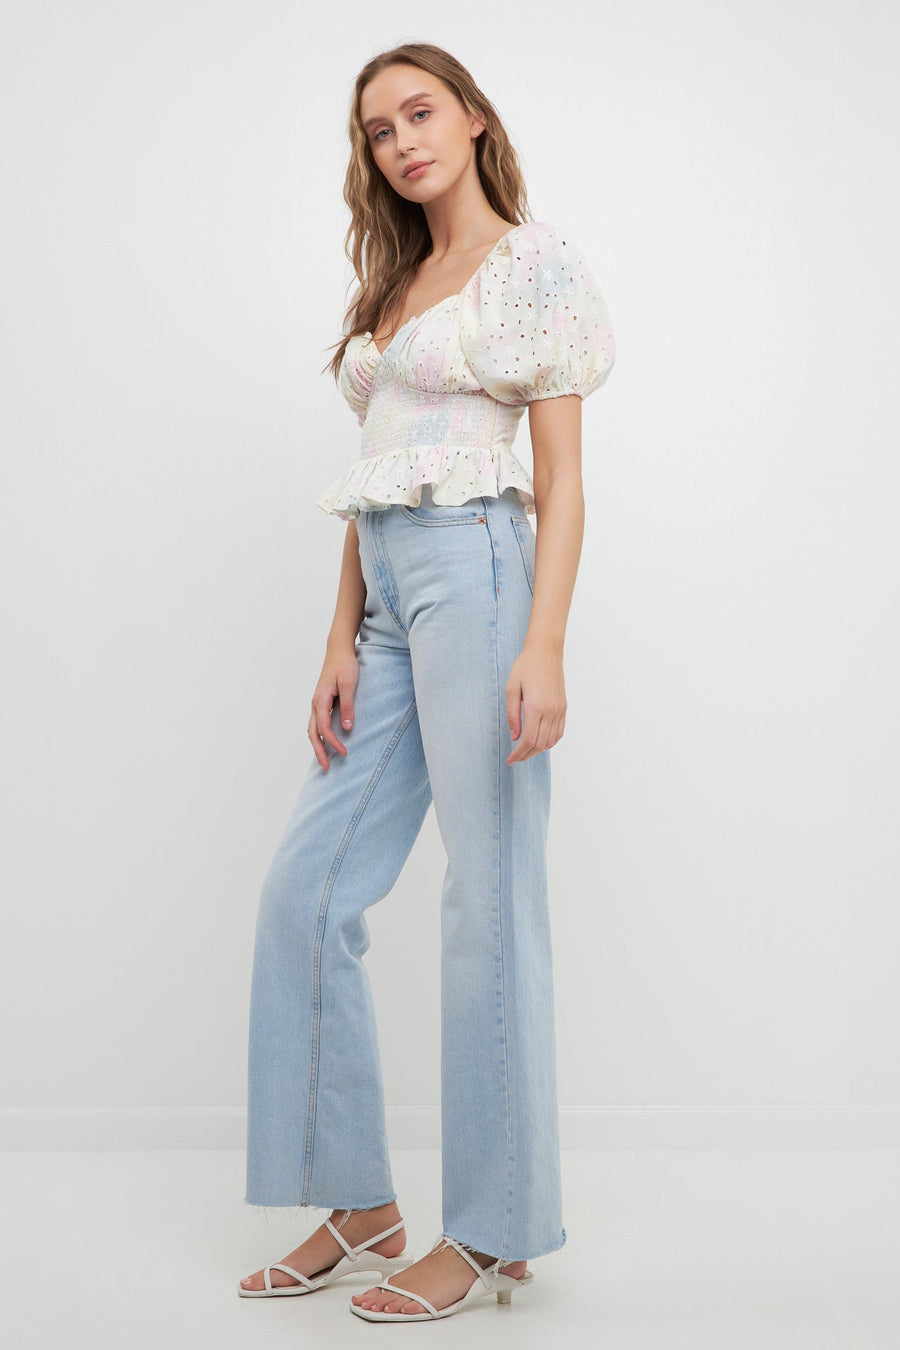 FREE THE ROSES-Embroidered Tie-dye Smocked Top-TOPS available at Objectrare